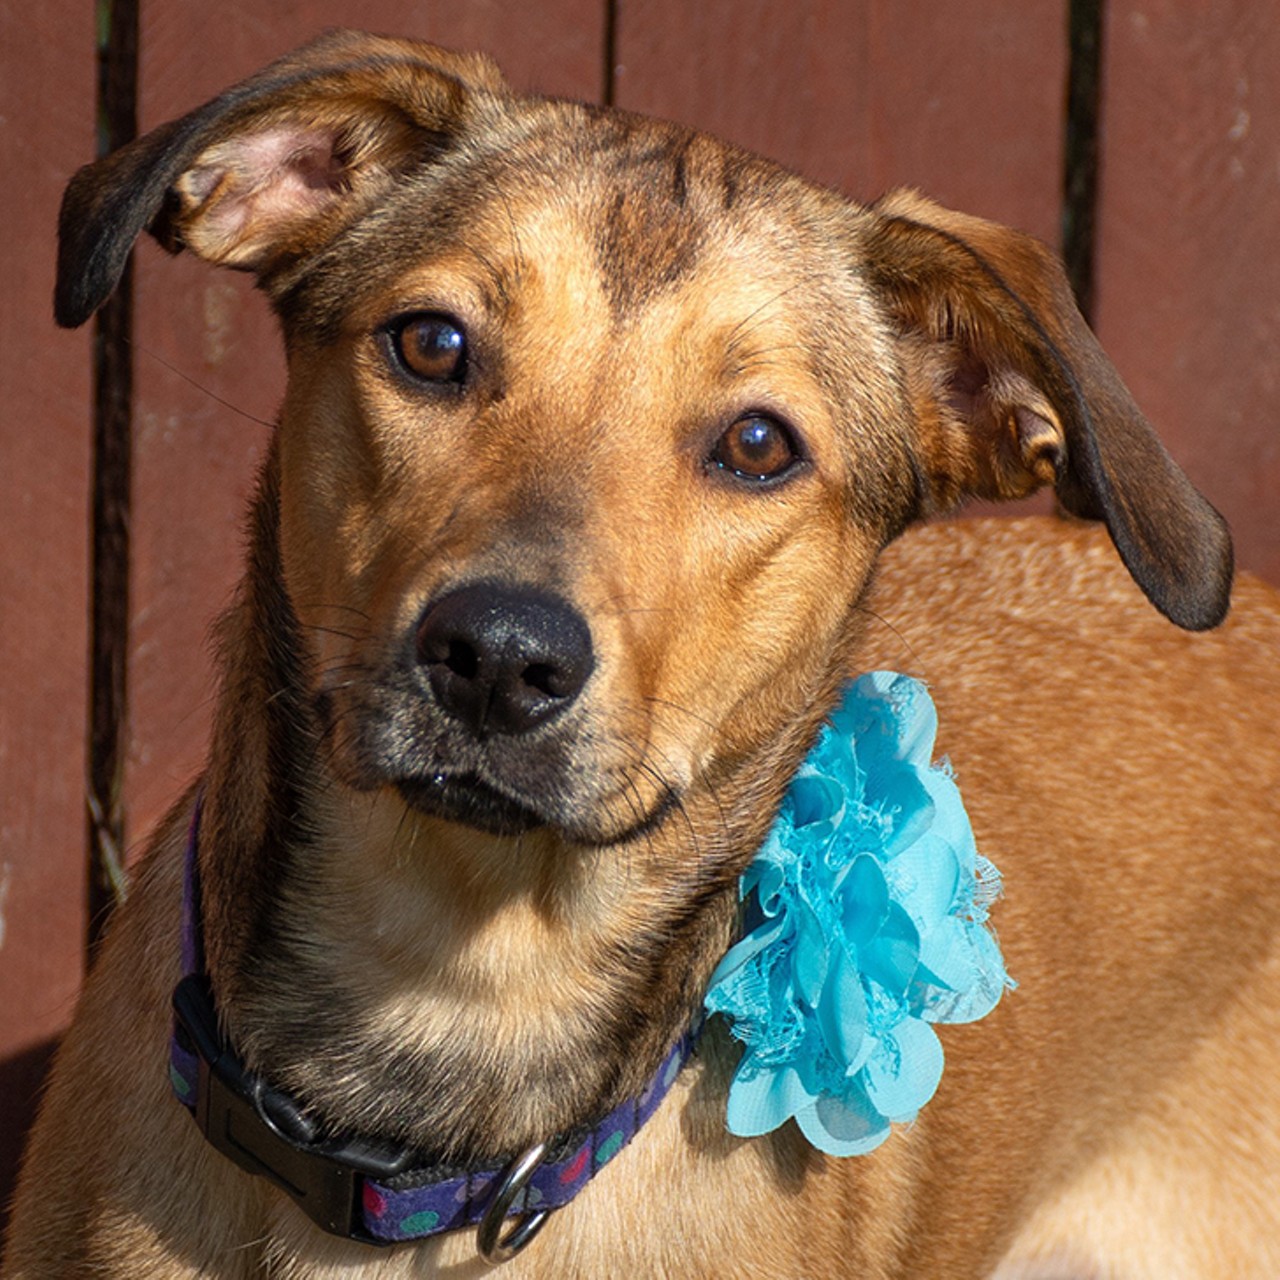 Buttercup
Age: 1 year old | Breed: Hound/Shepherd | Sex: Female | Rescue: Louie&#146;s Legacy 
Photo via LouiesLegacy.org